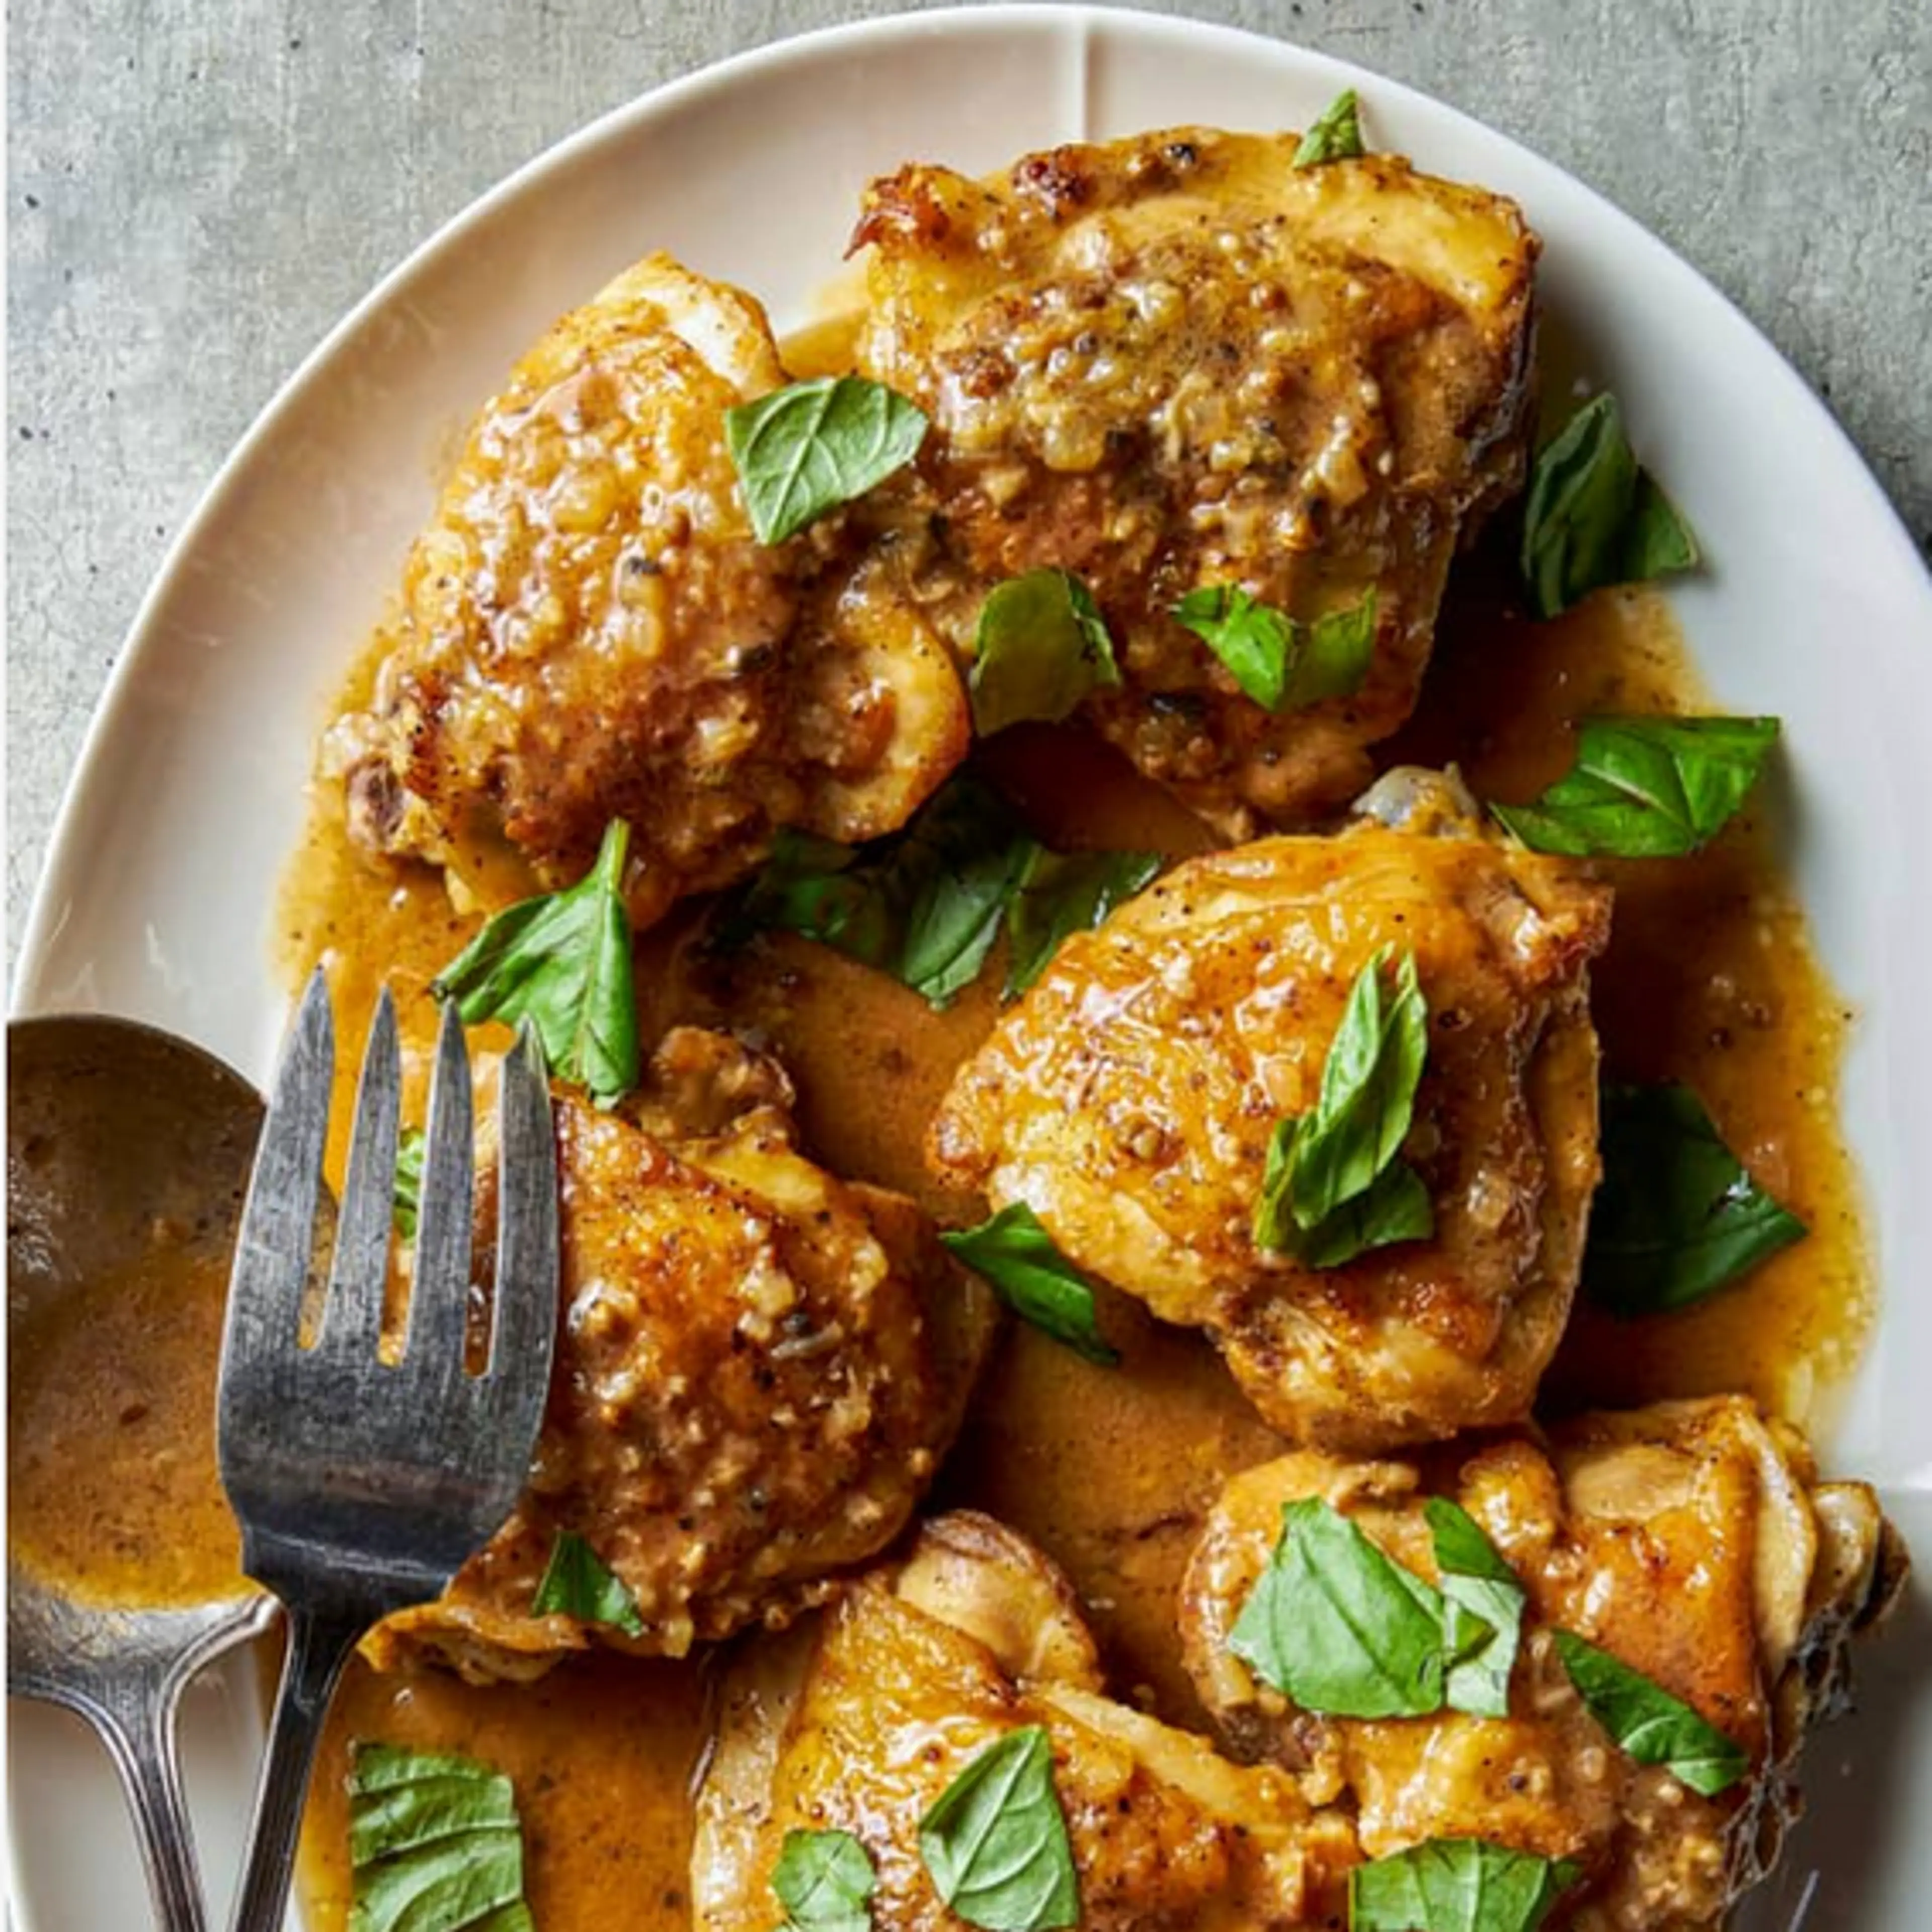 Braised Chicken Thighs with Lemon, Spices, and Torn Basil.